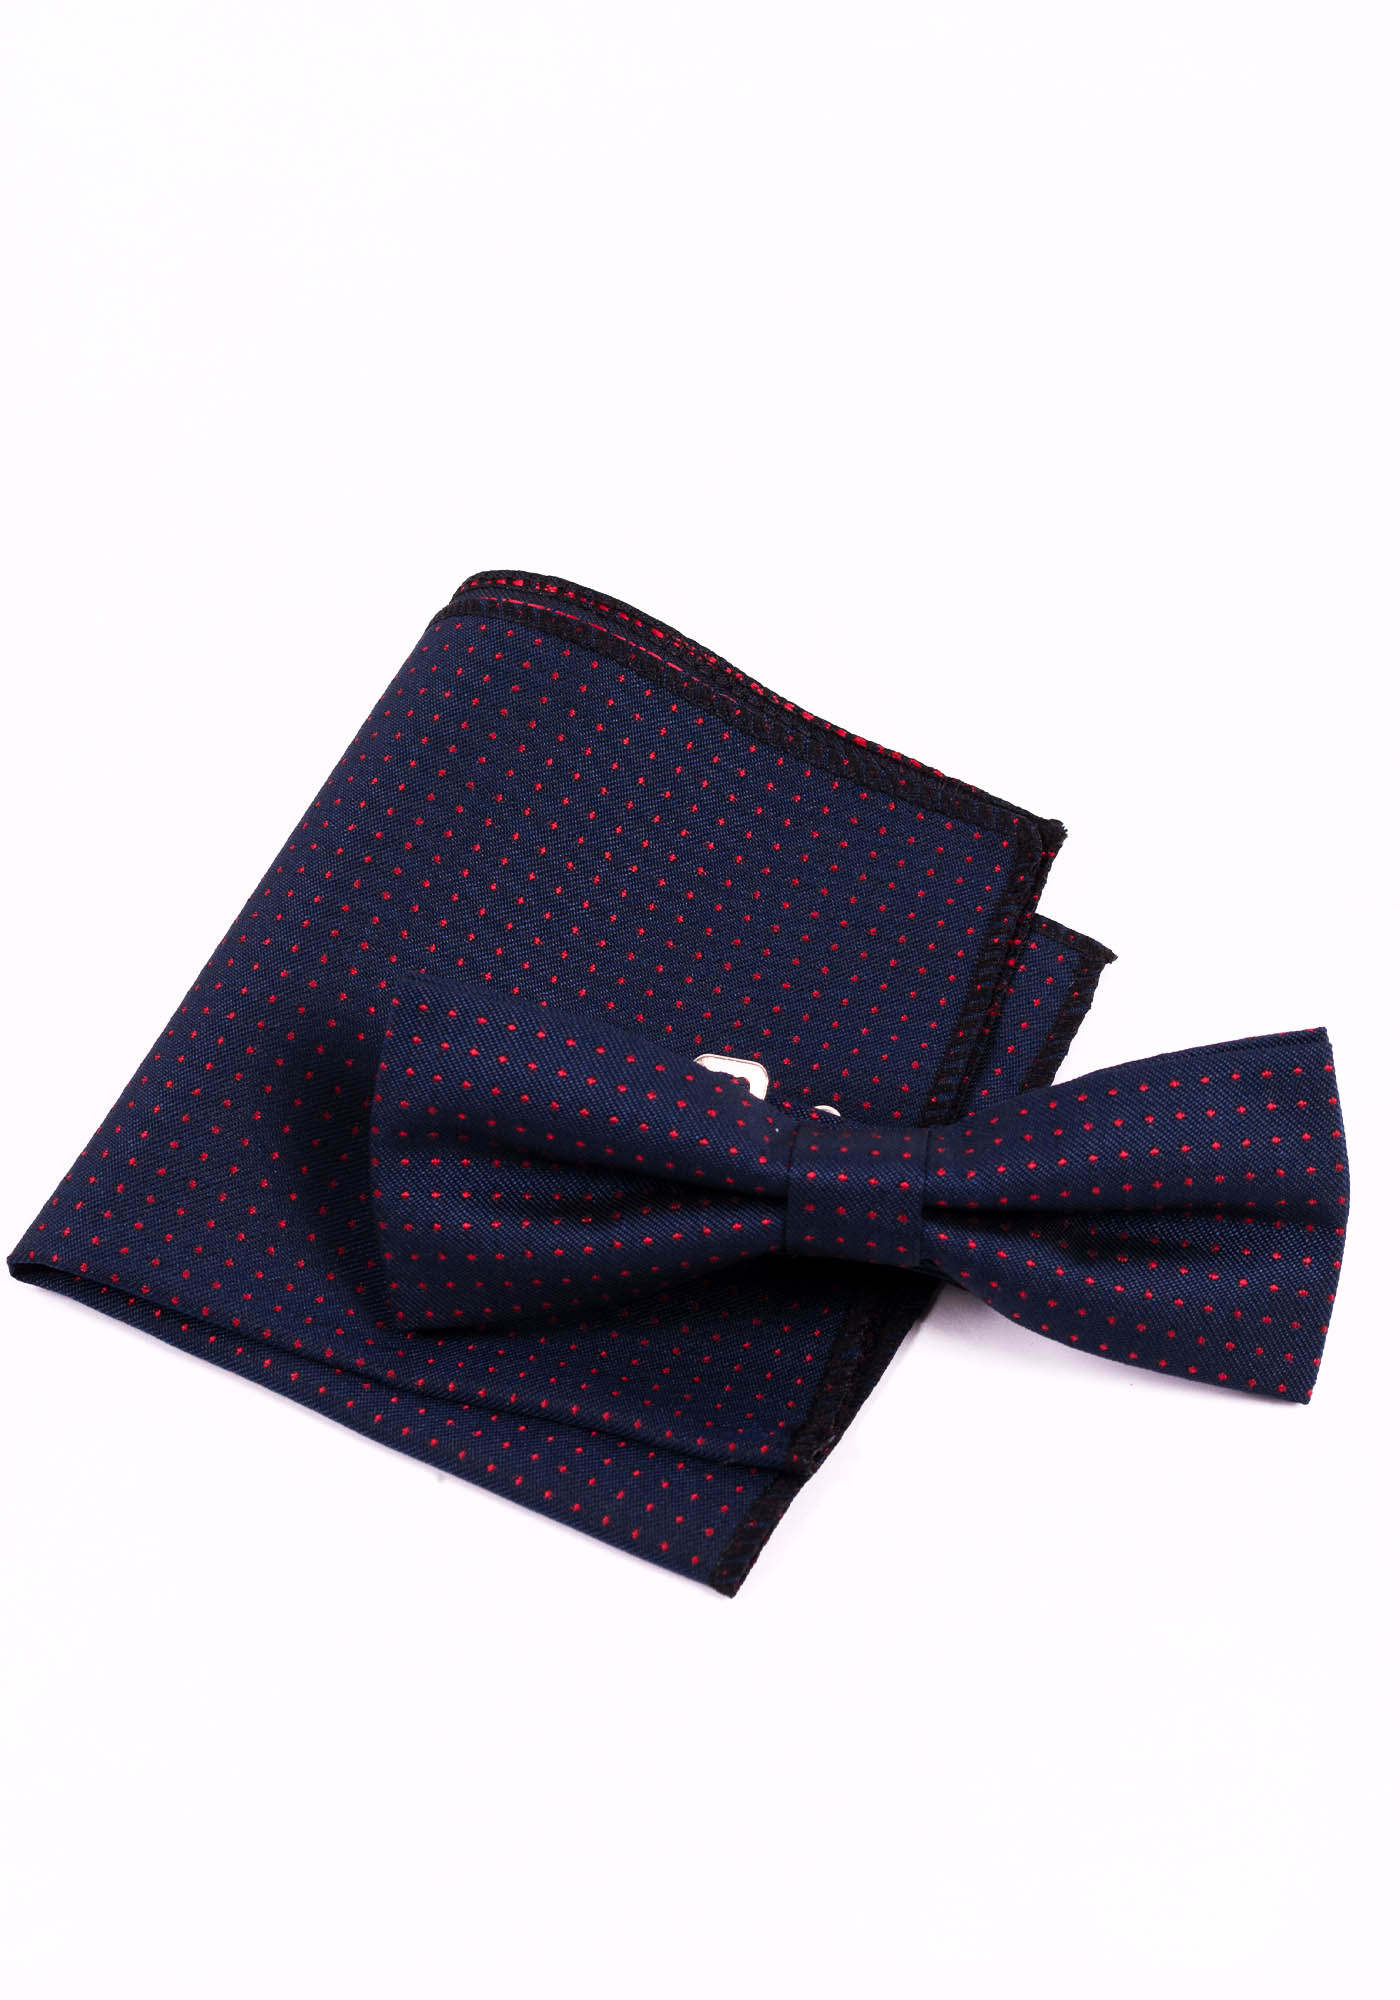 Bow tie and scarf gift set in silk jacquard